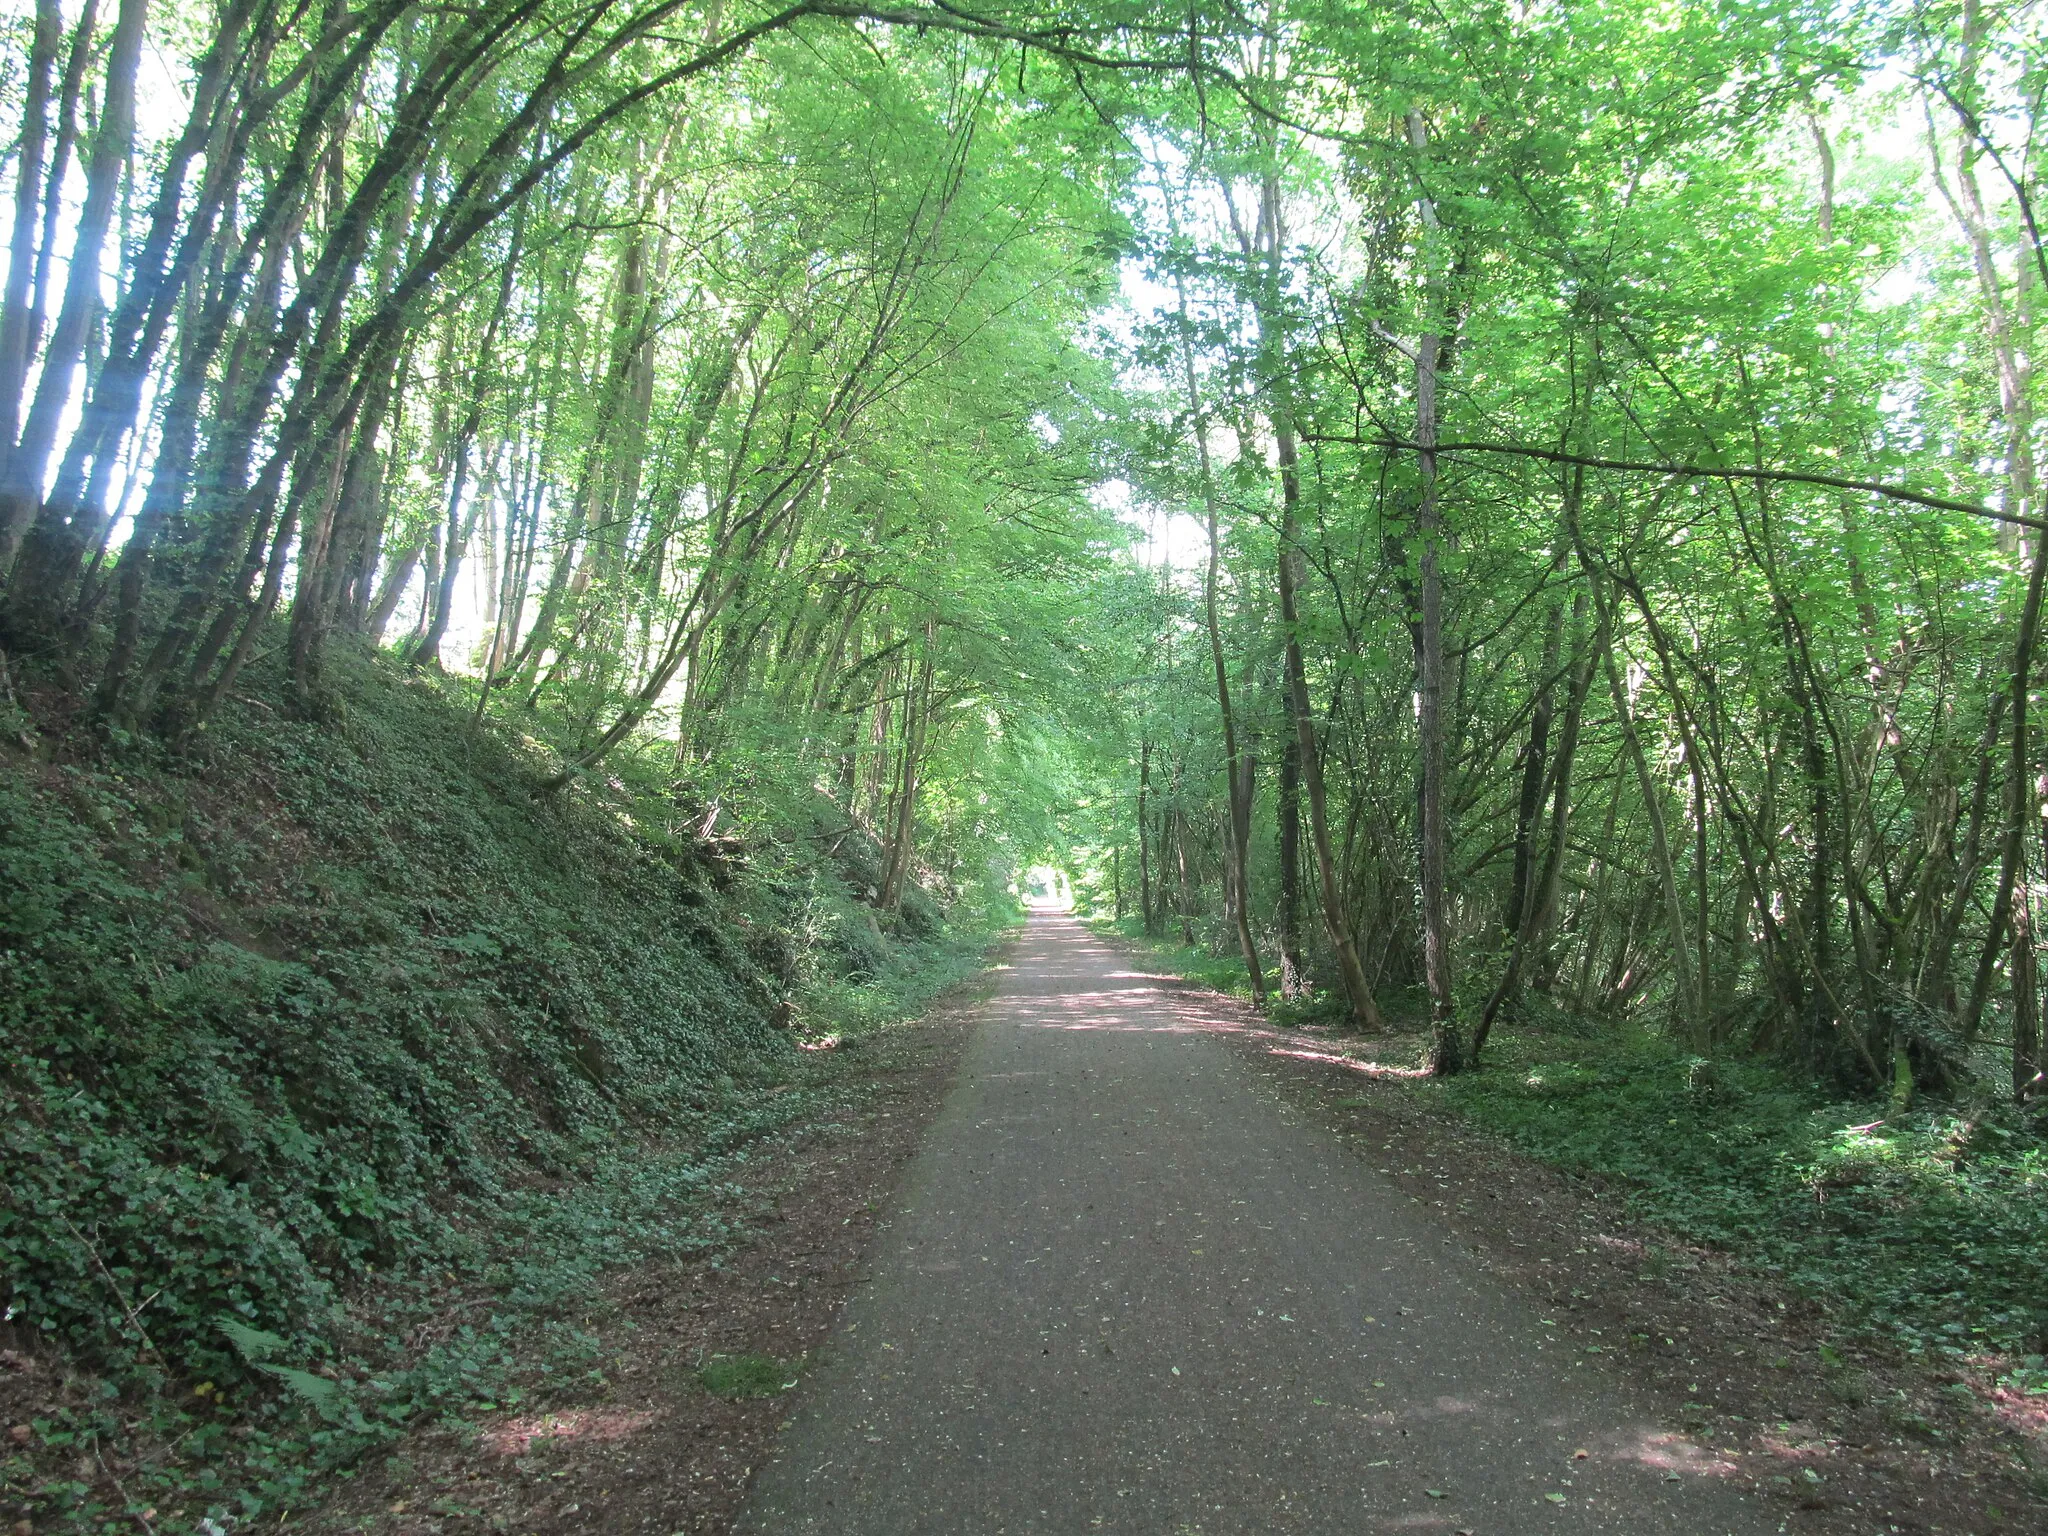 Photo showing: Section of the former 126 Statte – Ciney railway line in Belgium, near Fourneau train station. The line was converted into a bicycle track.